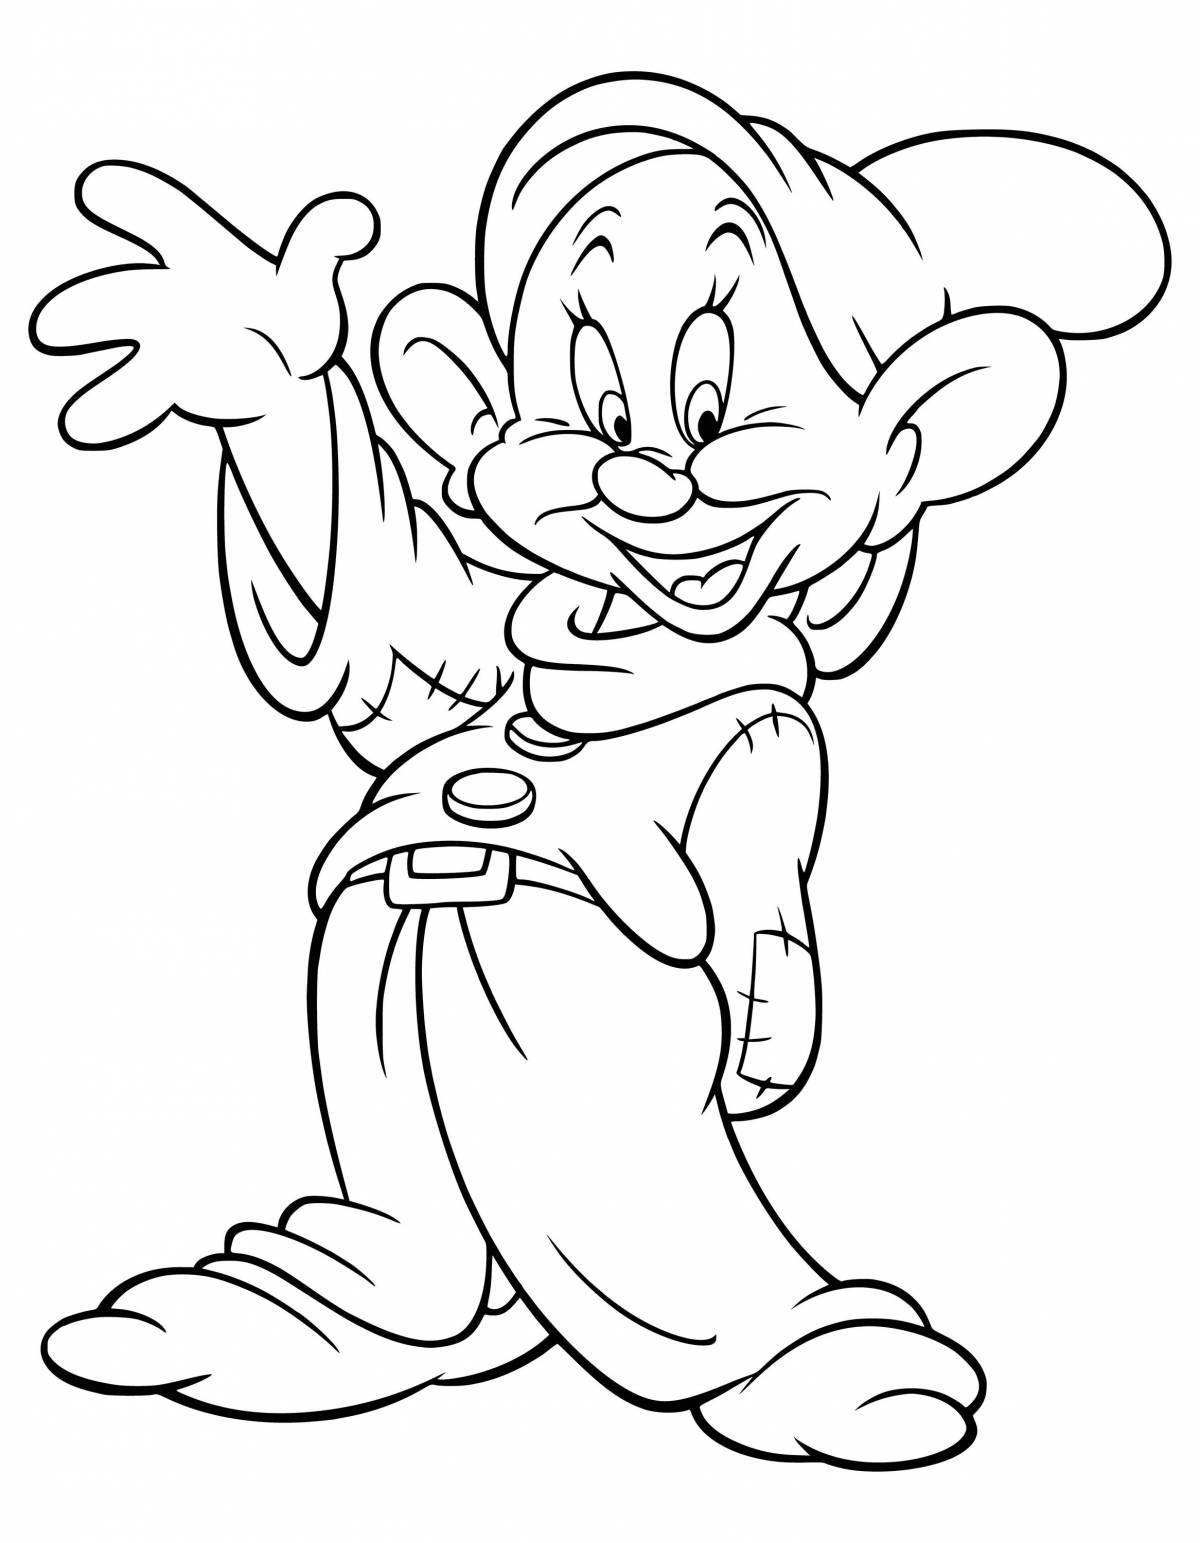 Cute cartoon characters coloring pages for kids